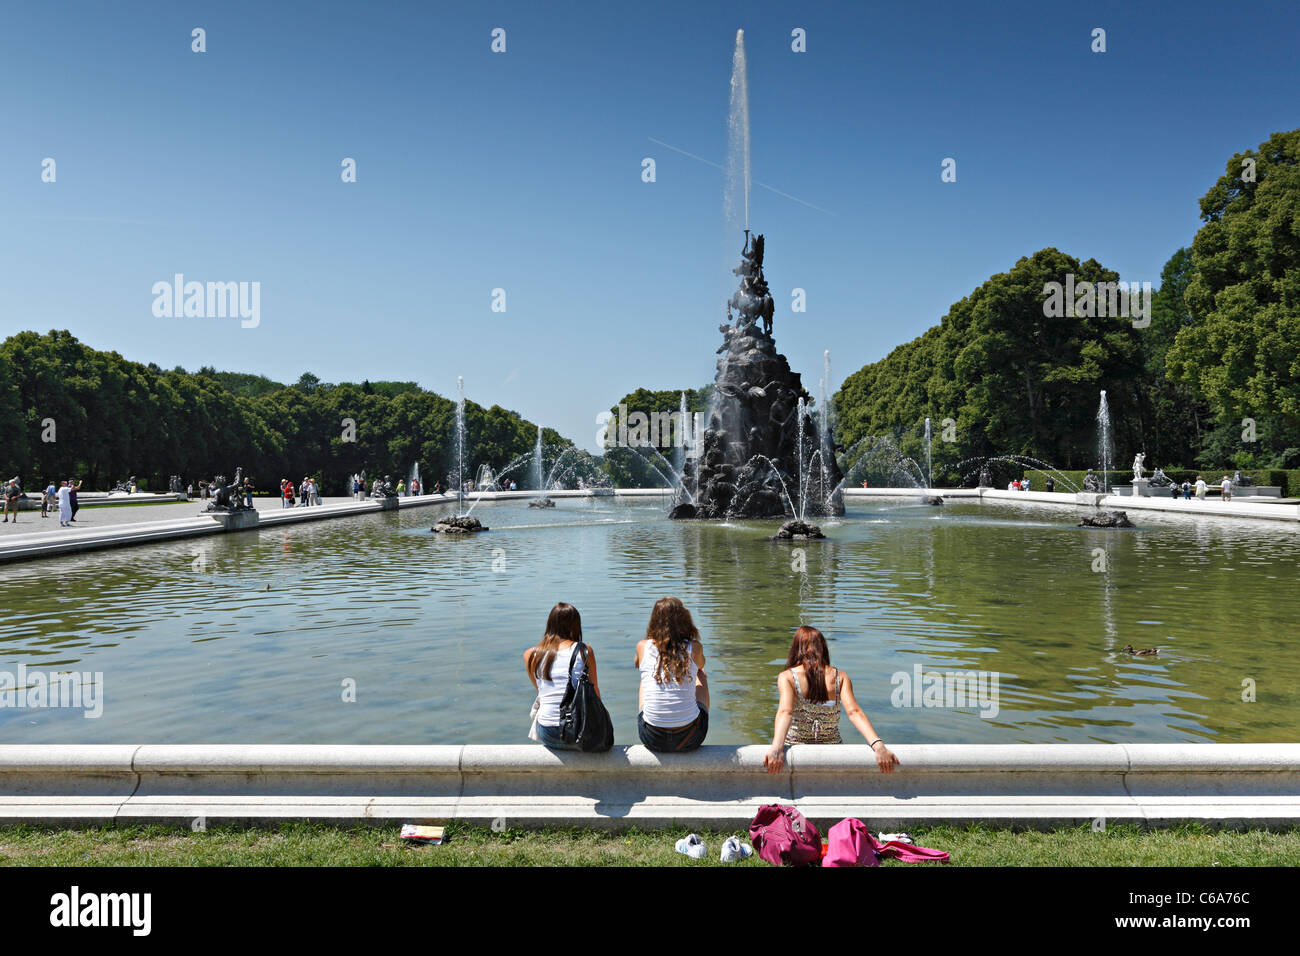 3 young woman sitting on the edge of Fama Fountain, Herreninsel Upper Bavaria Germany Stock Photo